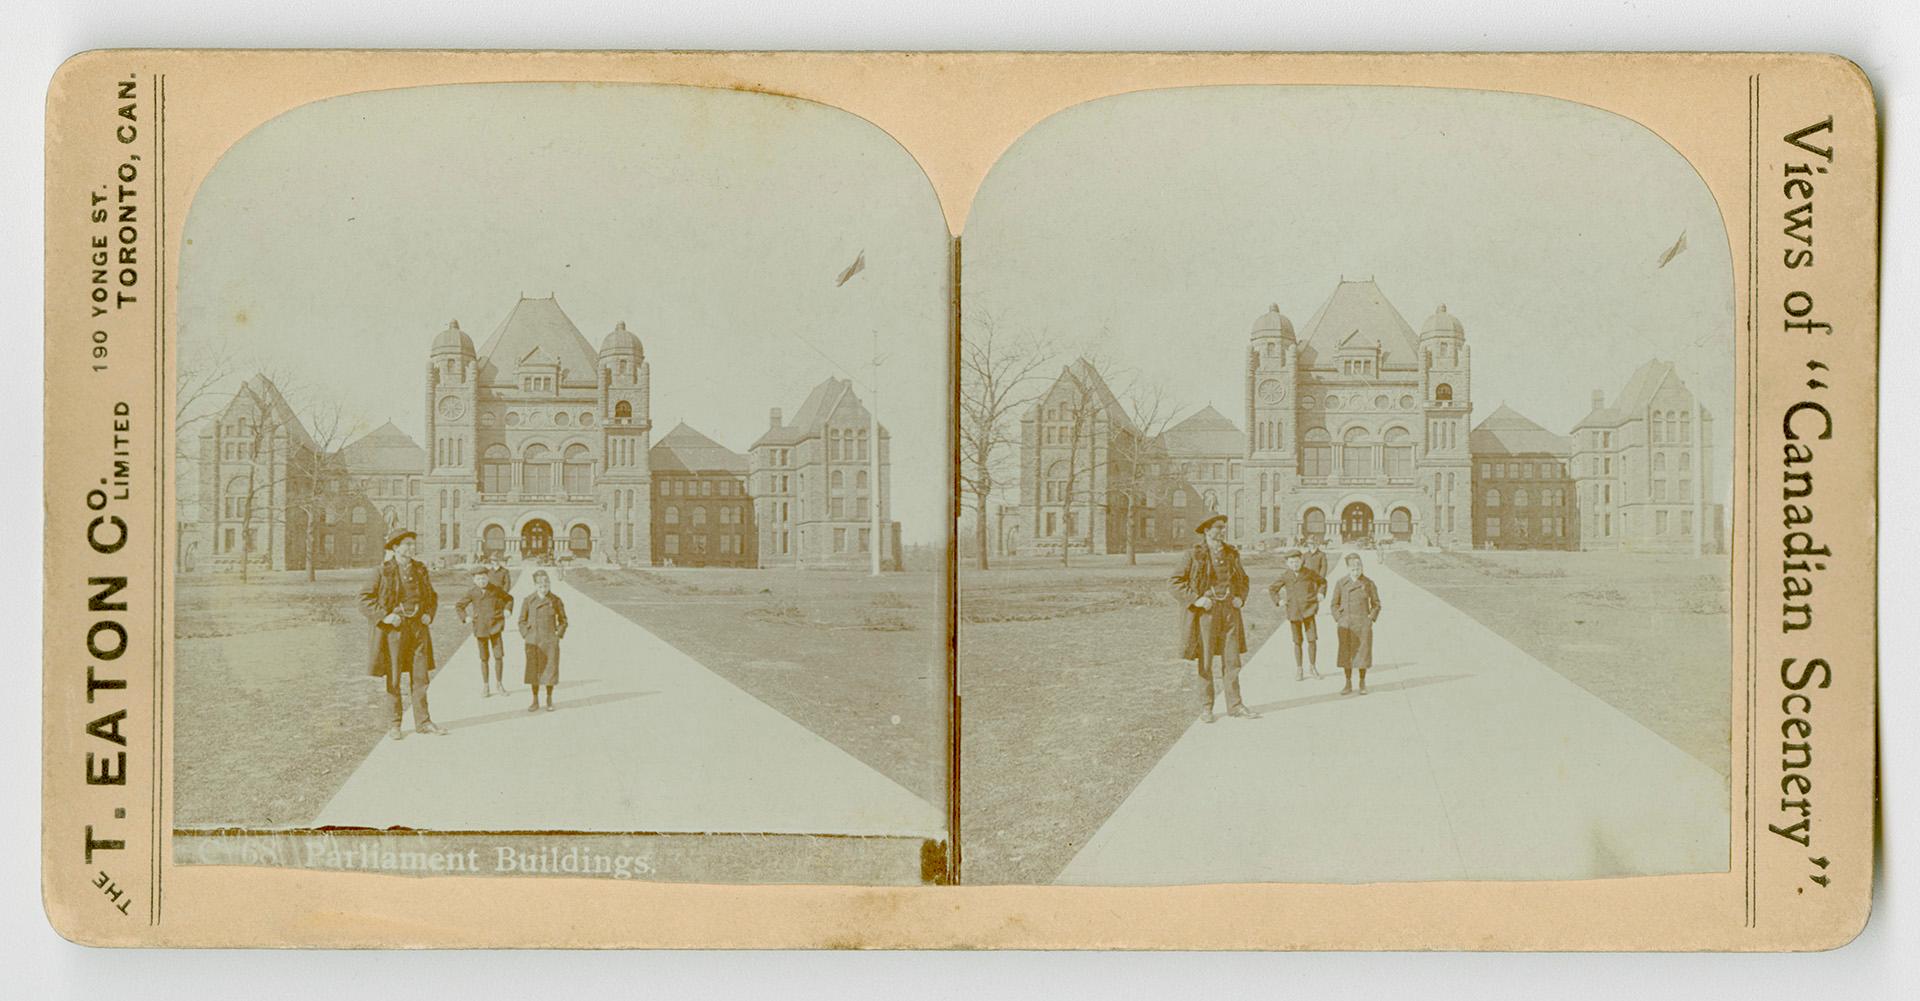 Pictures show three people standing on a path in front a huge Ricardsonian Romanesque building.